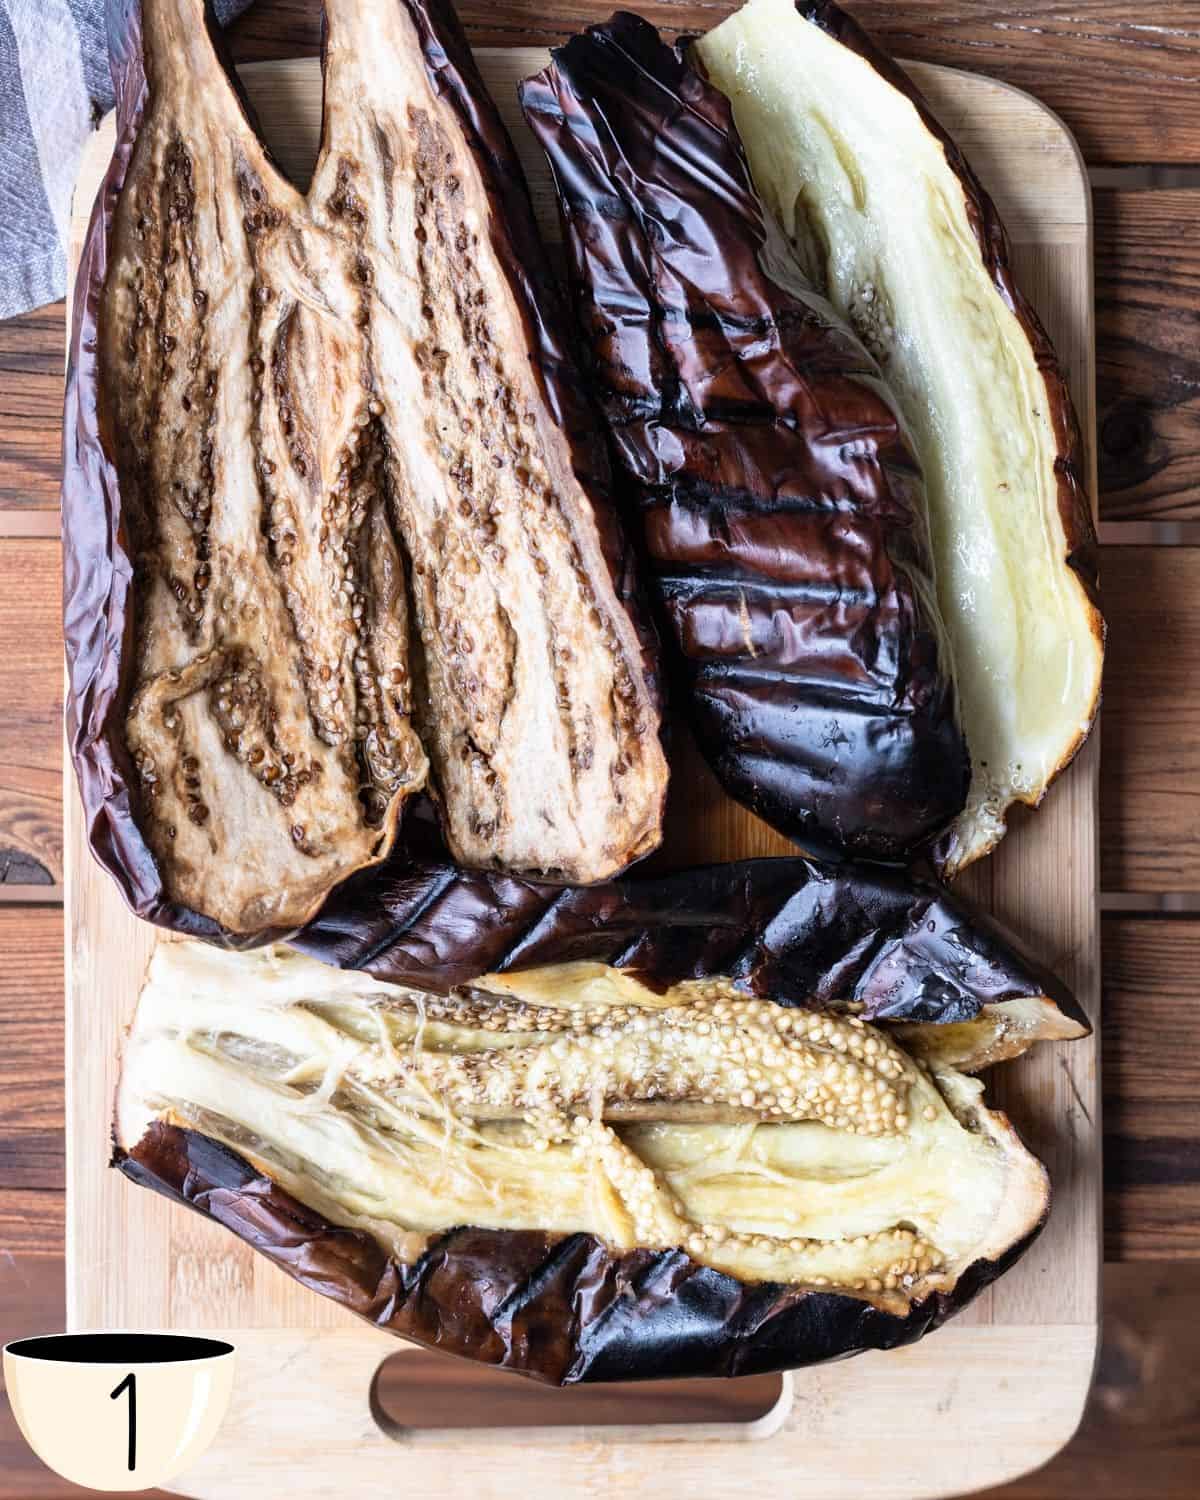 Roasted eggplants split open to reveal soft, cooked insides with a charred exterior, on a wooden cutting board, showing the preparation stage of a baba ganoush recipe